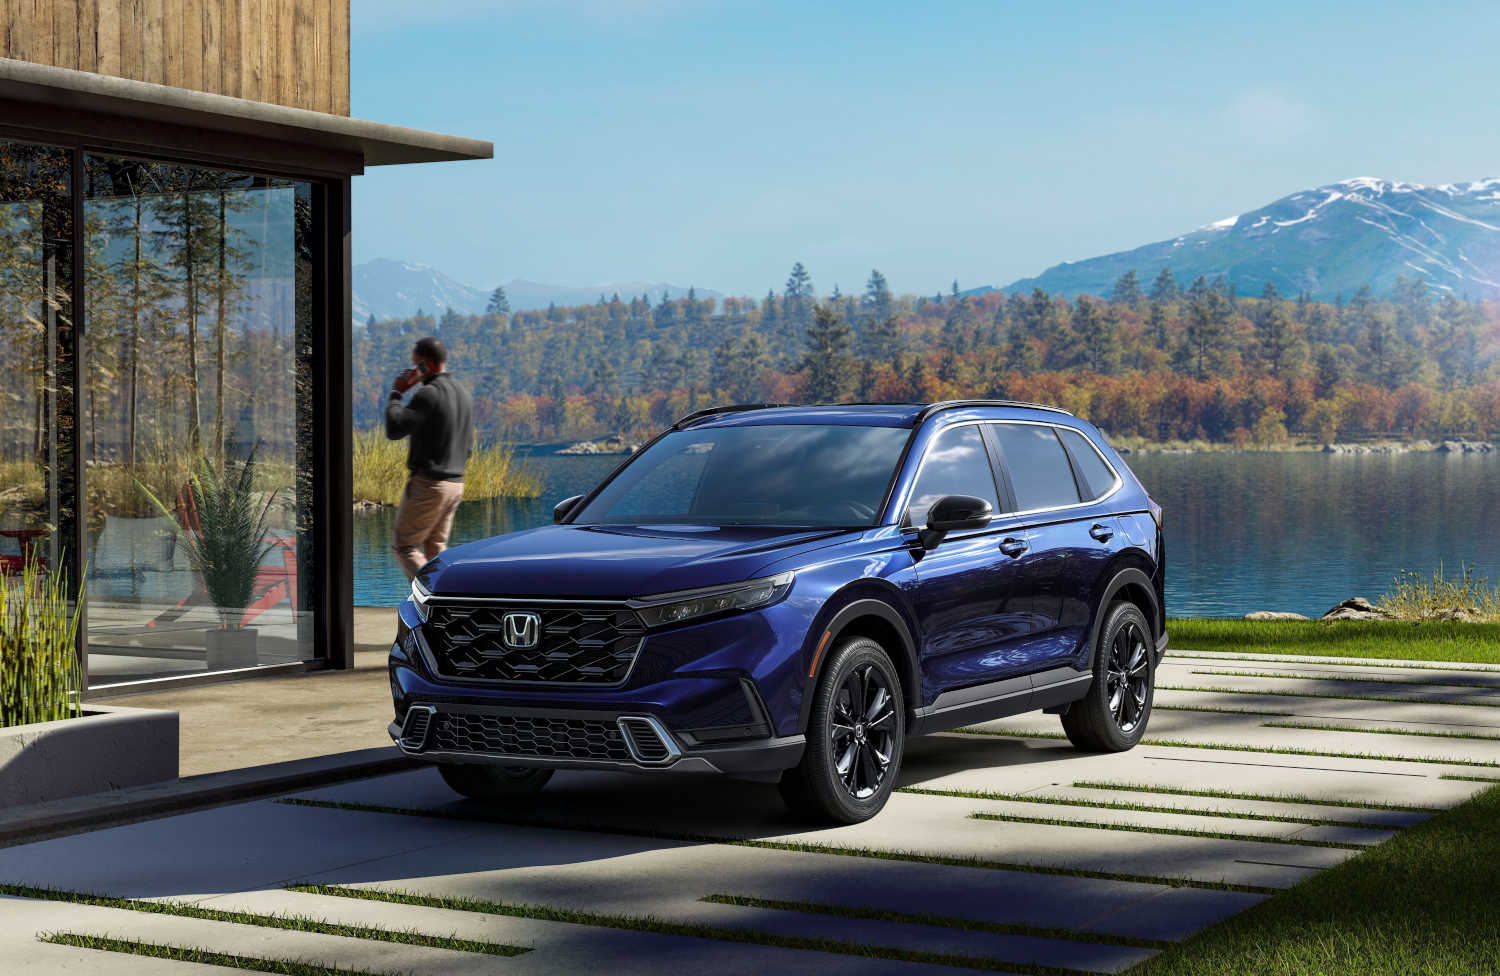 This 2023 Honda SUV helped win Kelley Blue Book's 2023 Brand Image Awards